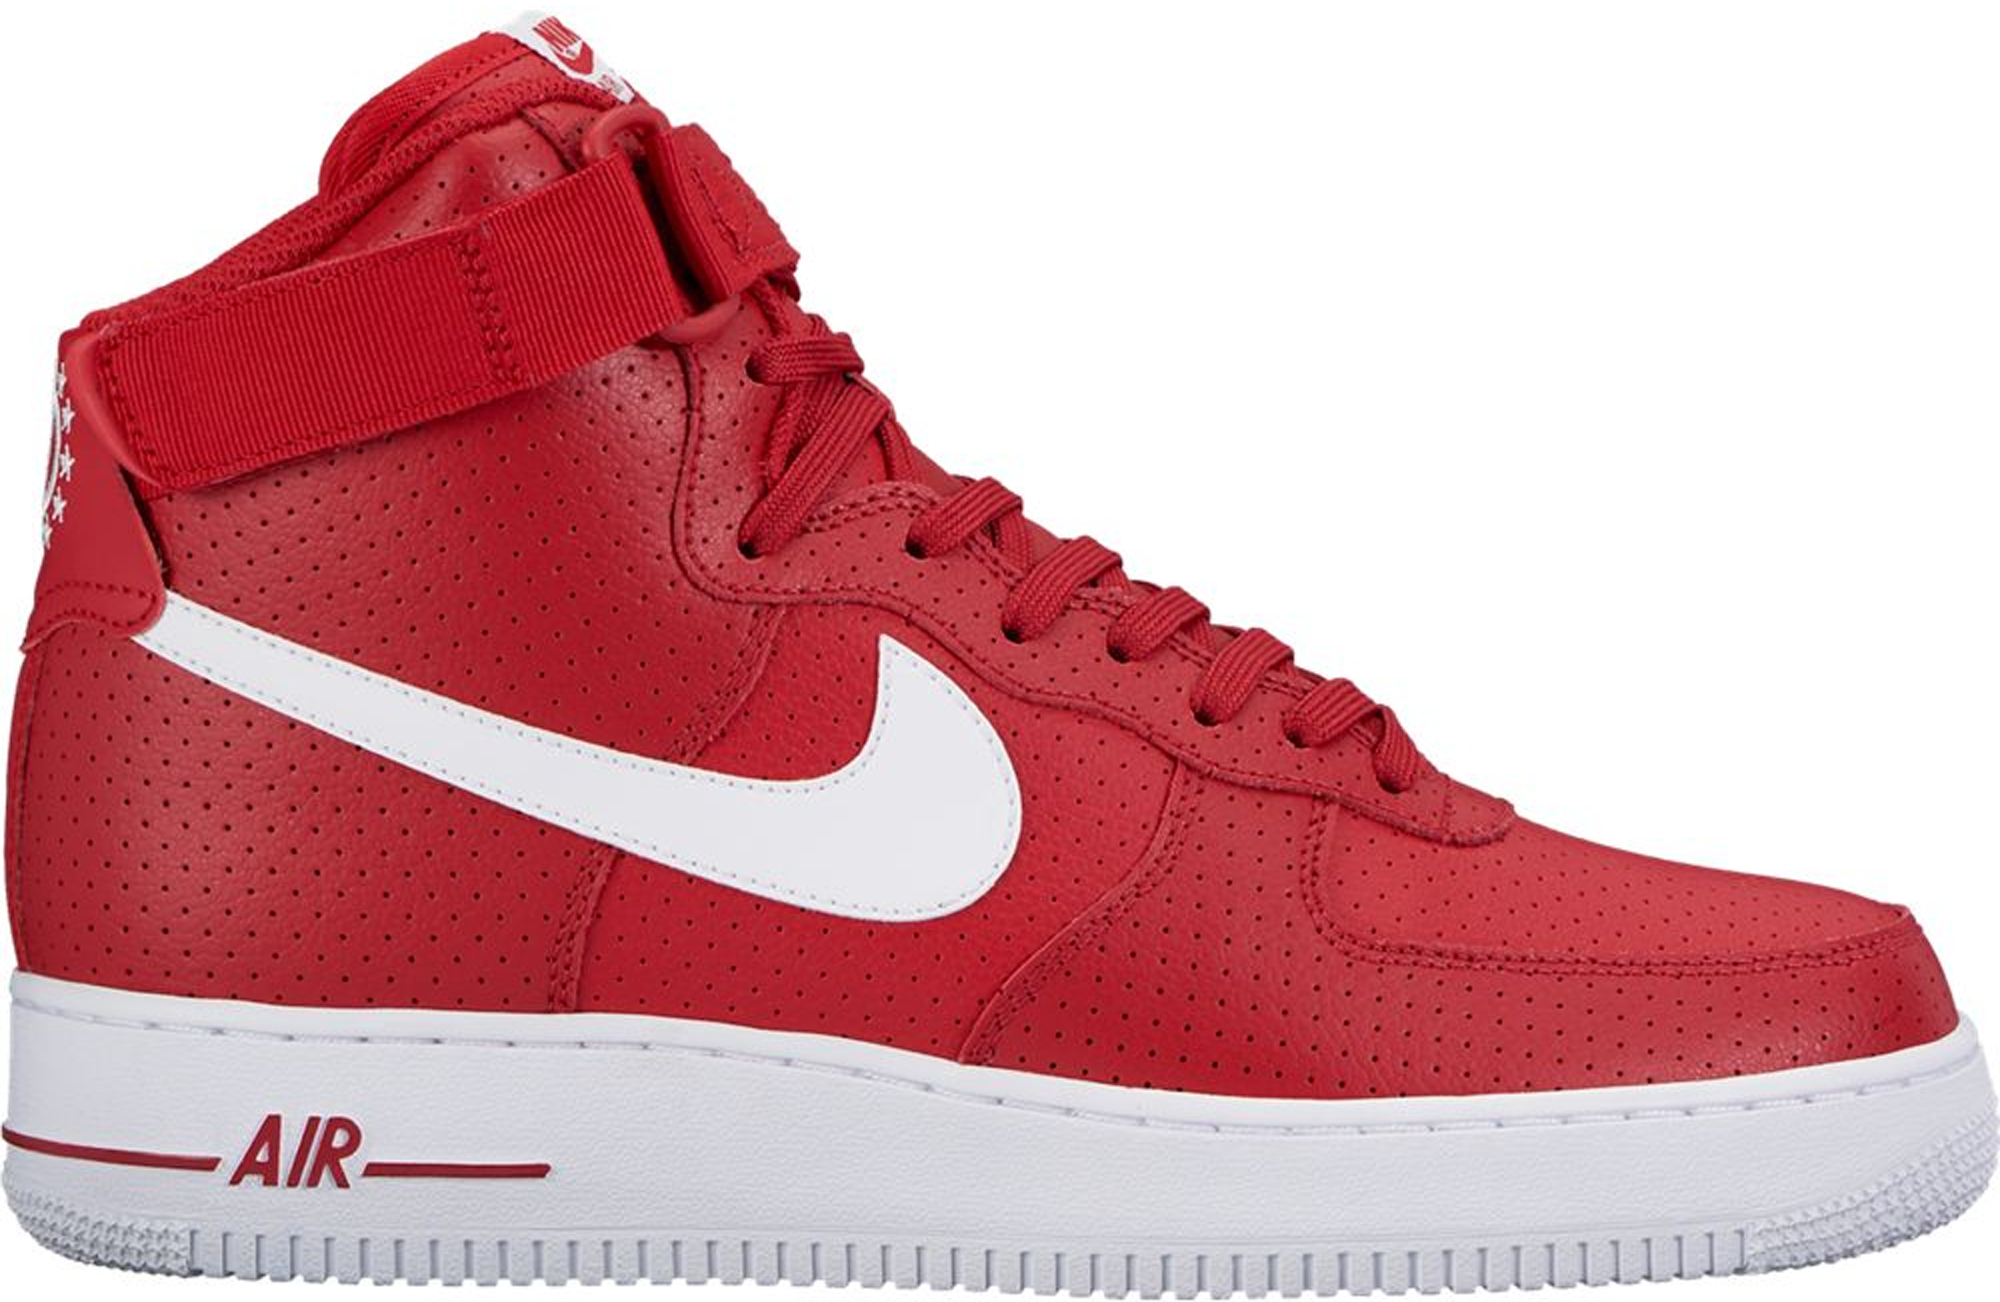 all red high top nike air force ones